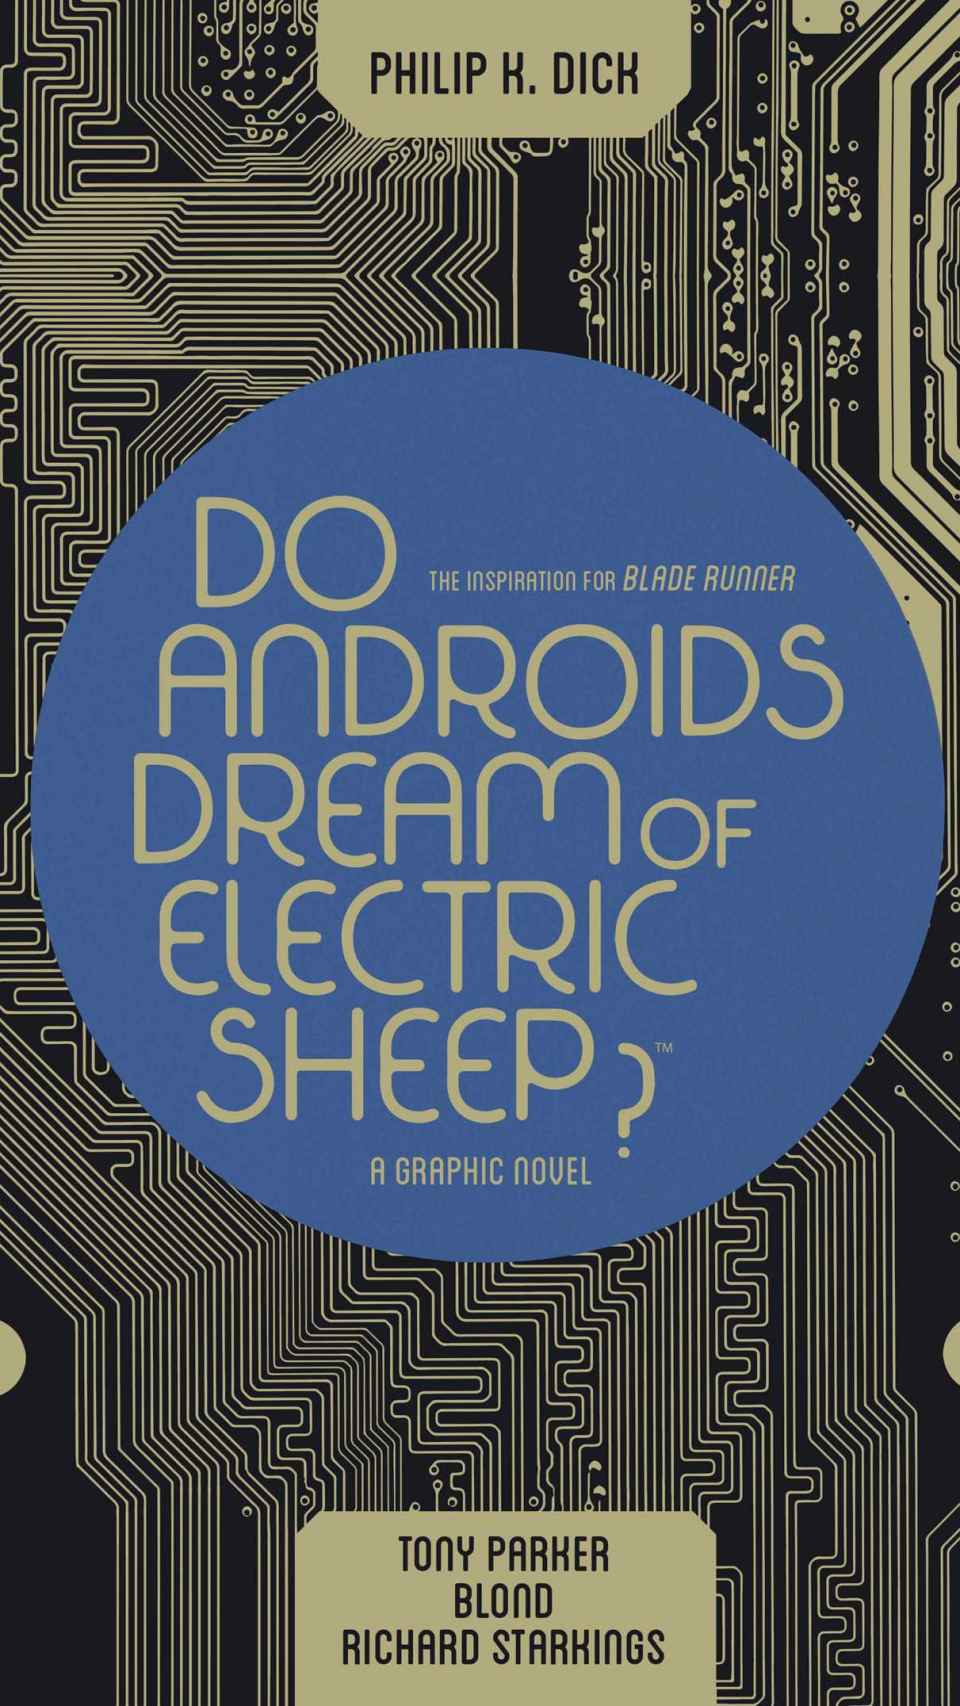 'Do Androids Dream of Electric Sheep?'